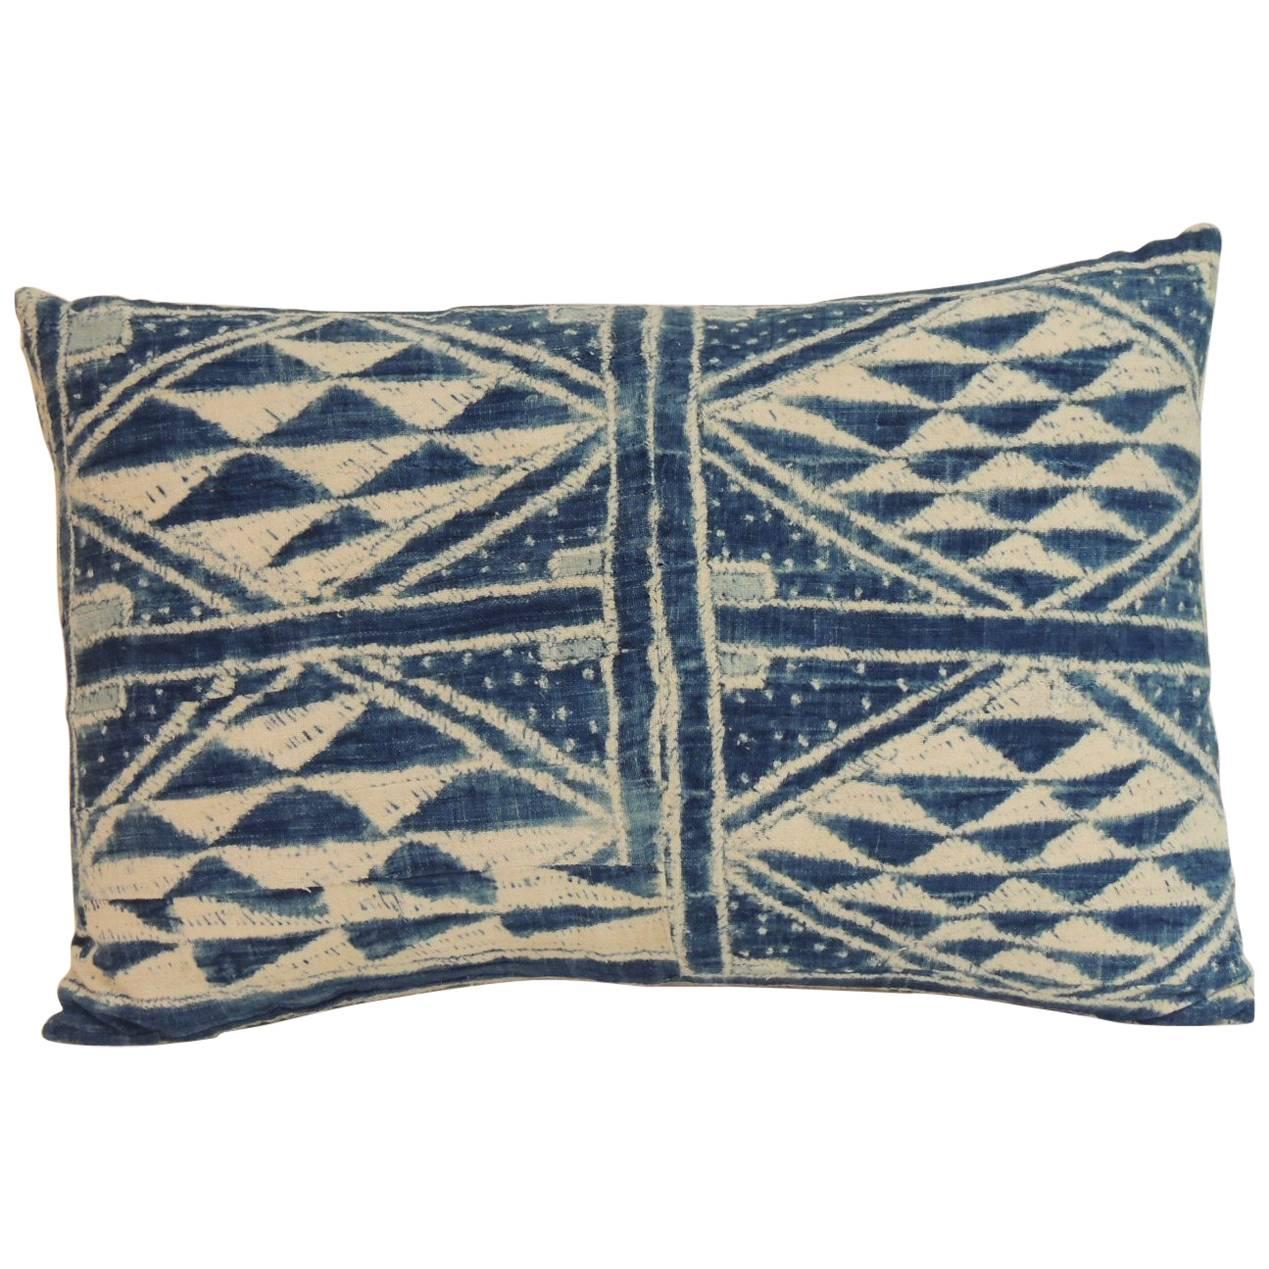 19th Century Blue and White “Ndop” African Woven Decorative Bolster Pillow